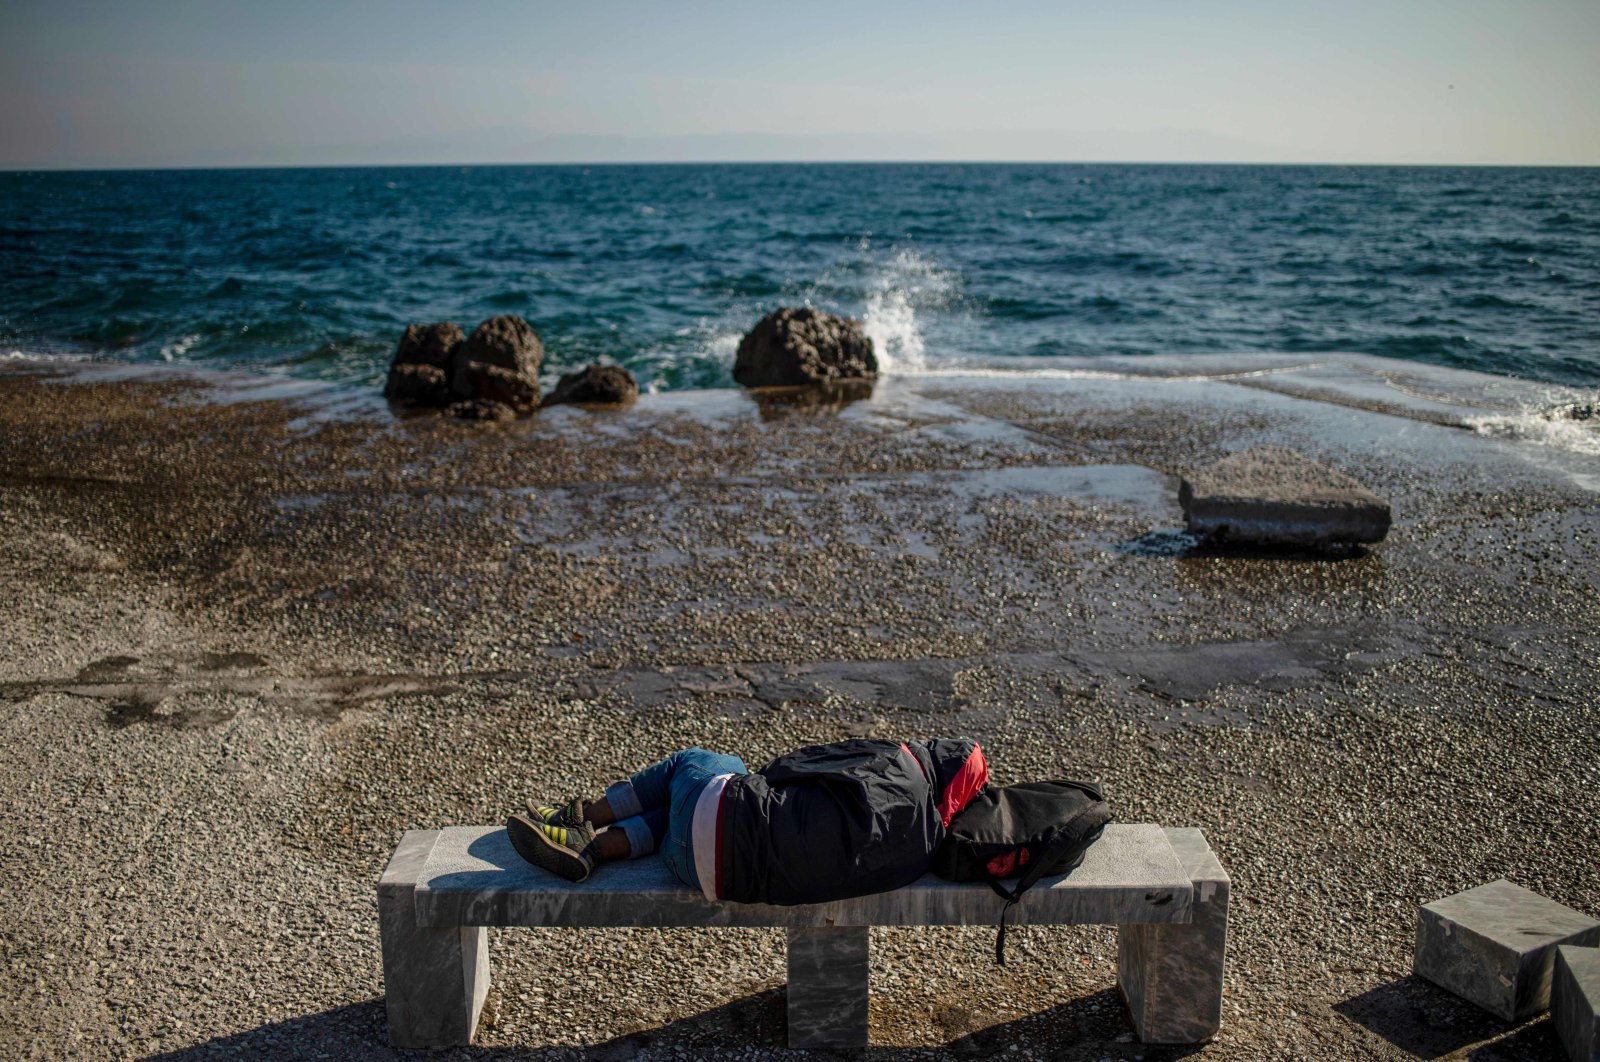 A migrant sleeps on a bench at the harbor quay on the island of Lesbos, Greece, on March 3, 2020 (AFP Photo)